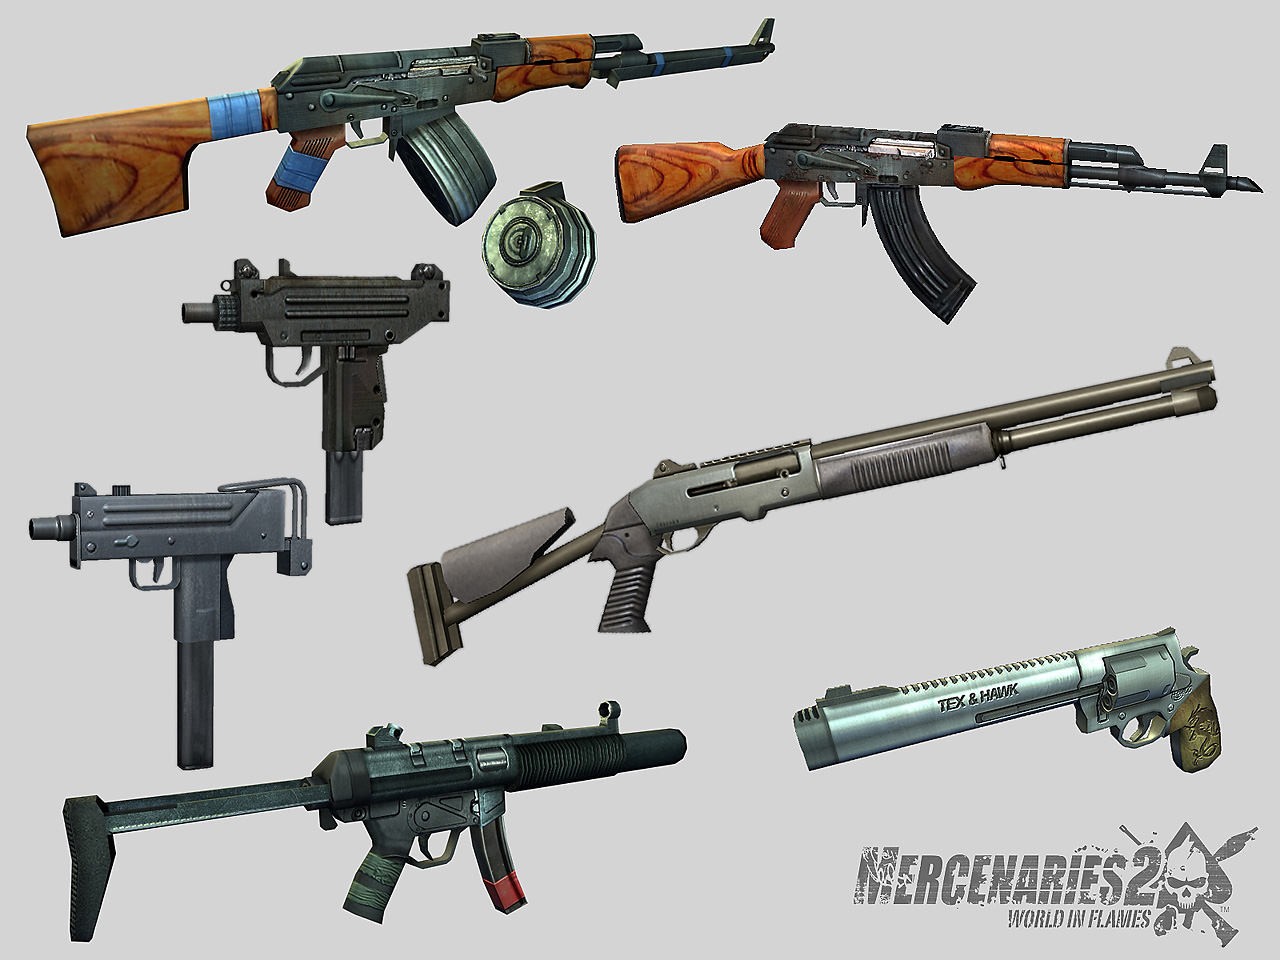 3rd person weapon models for Mercenaries 2: World in Flames game